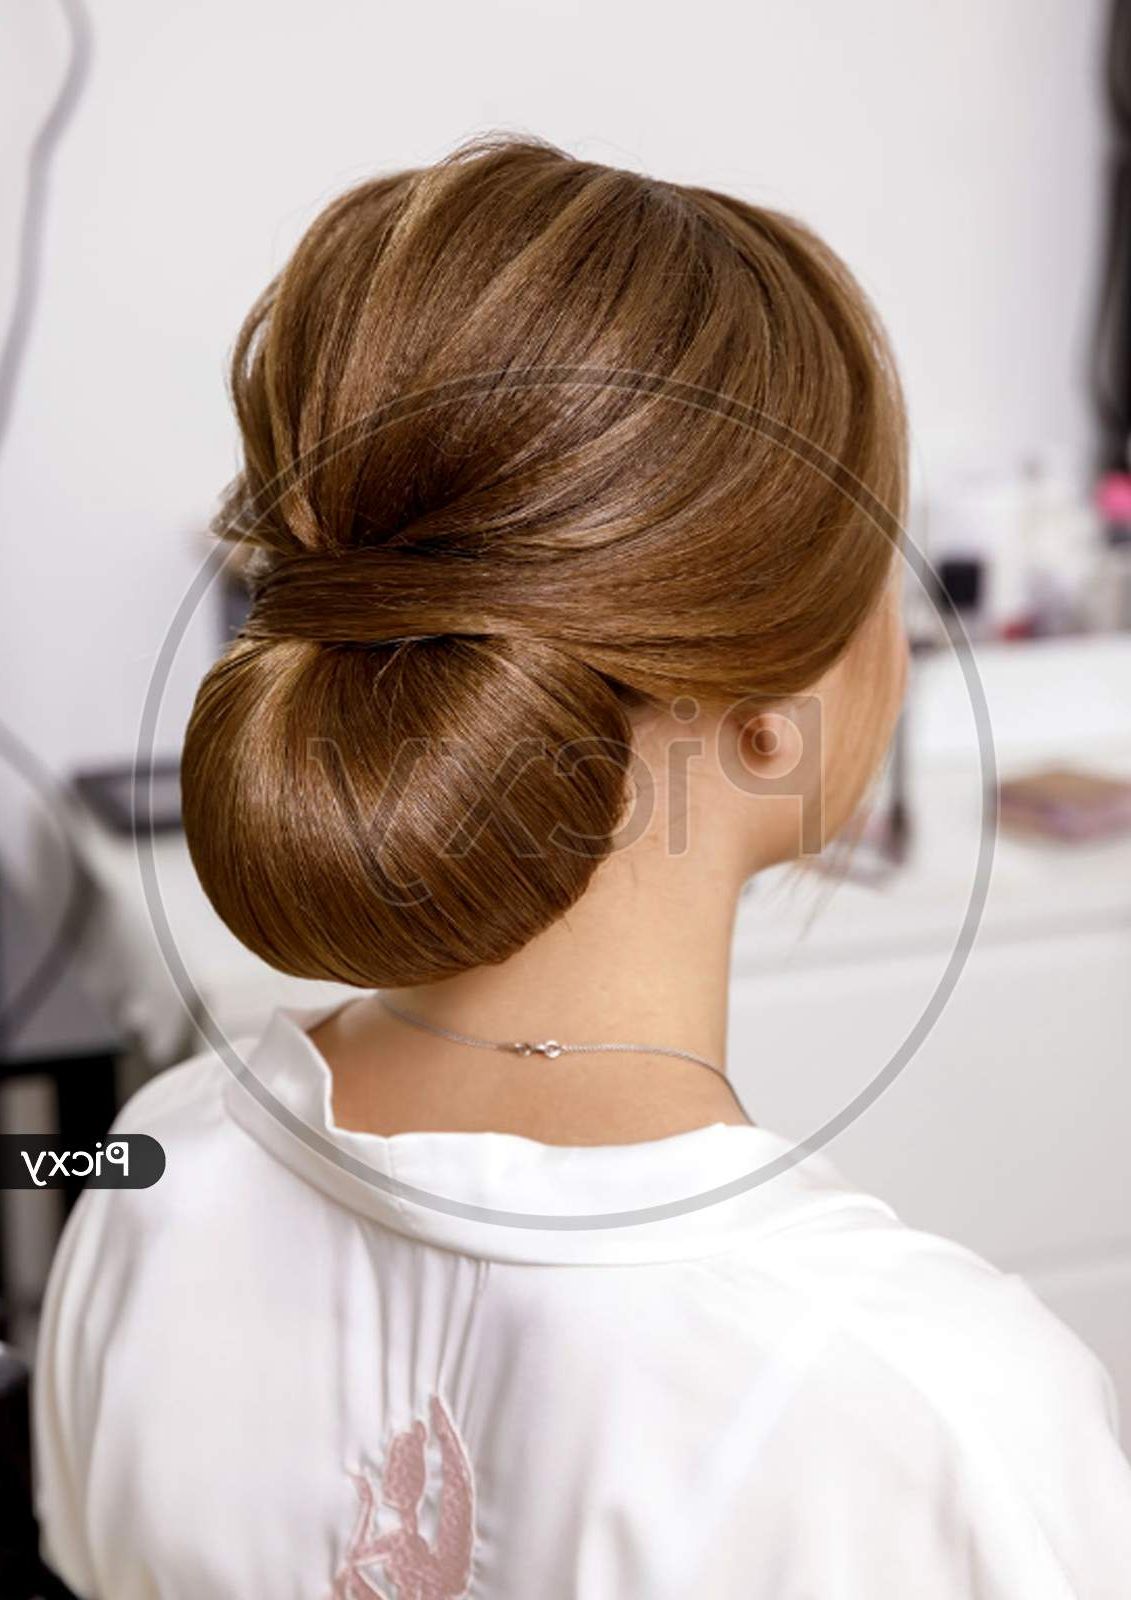 Most Recently Released Low Bun For Straight Hair Regarding Image Of Hairstyle Low Bun On Light Brown Straight Hair For The Bride On  The Wedding Day Uu693130 Picxy (Gallery 8 of 15)